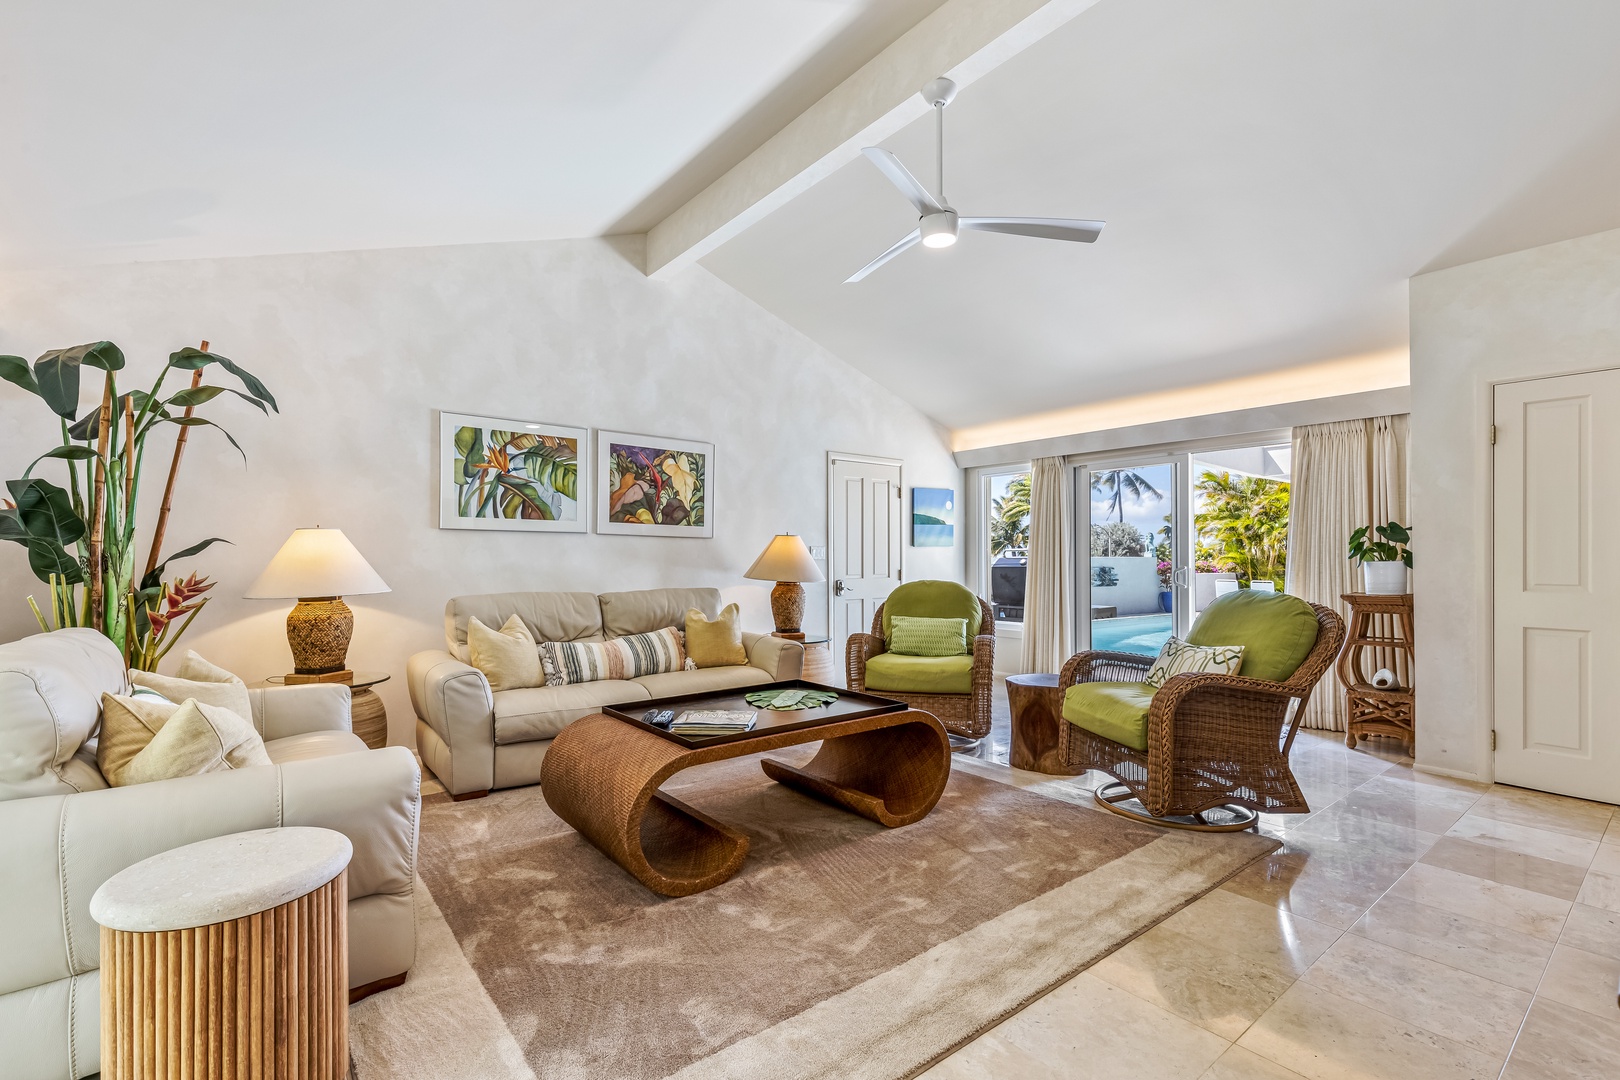 Honolulu Vacation Rentals, Hale Ola - The Living room invites you to gather with friends